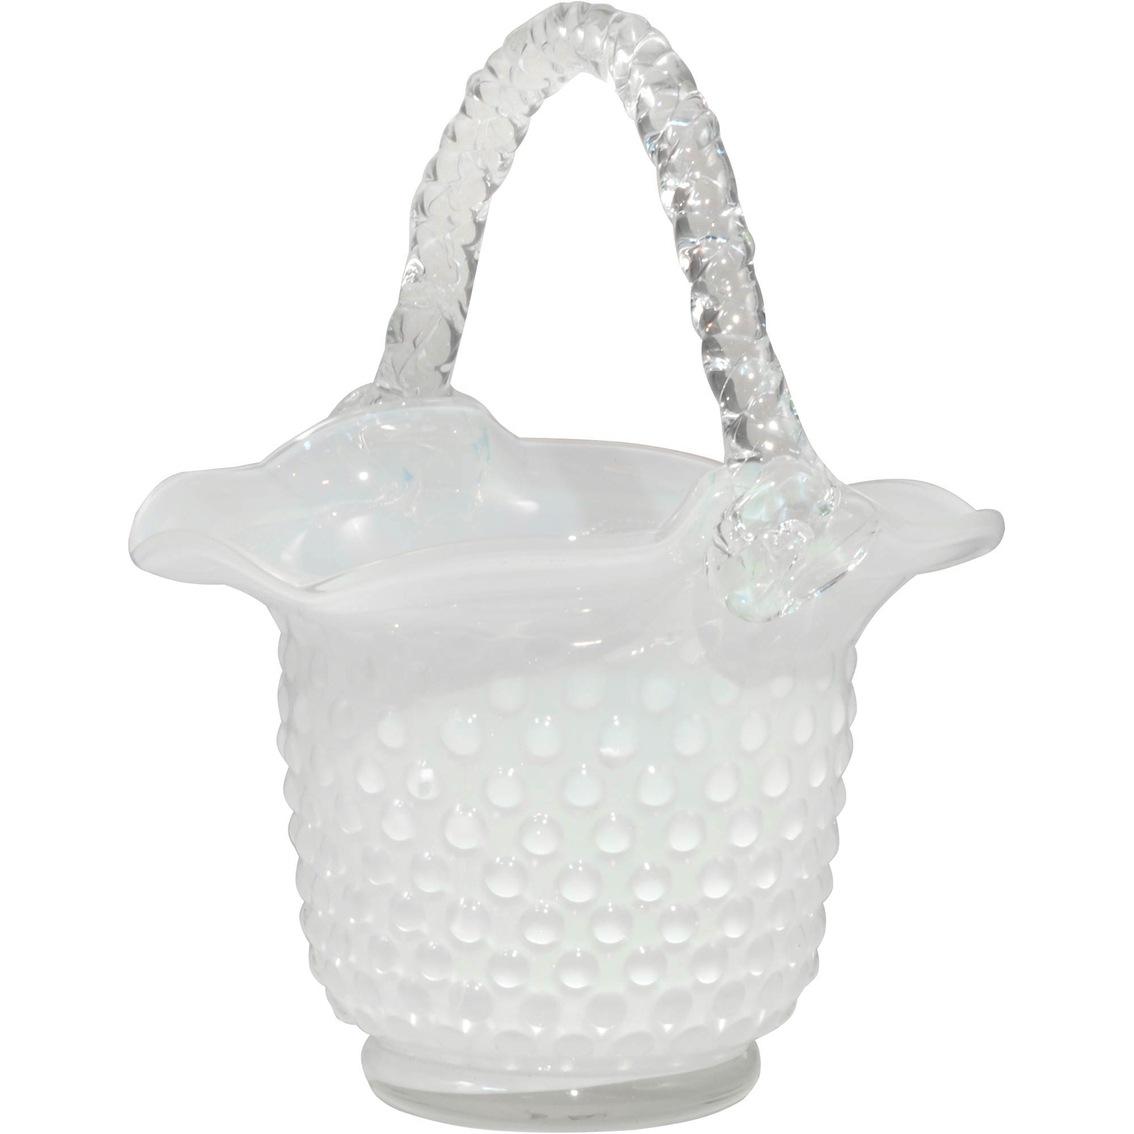 Dale Tiffany Clear Art Glass Basket - Image 1 of 2